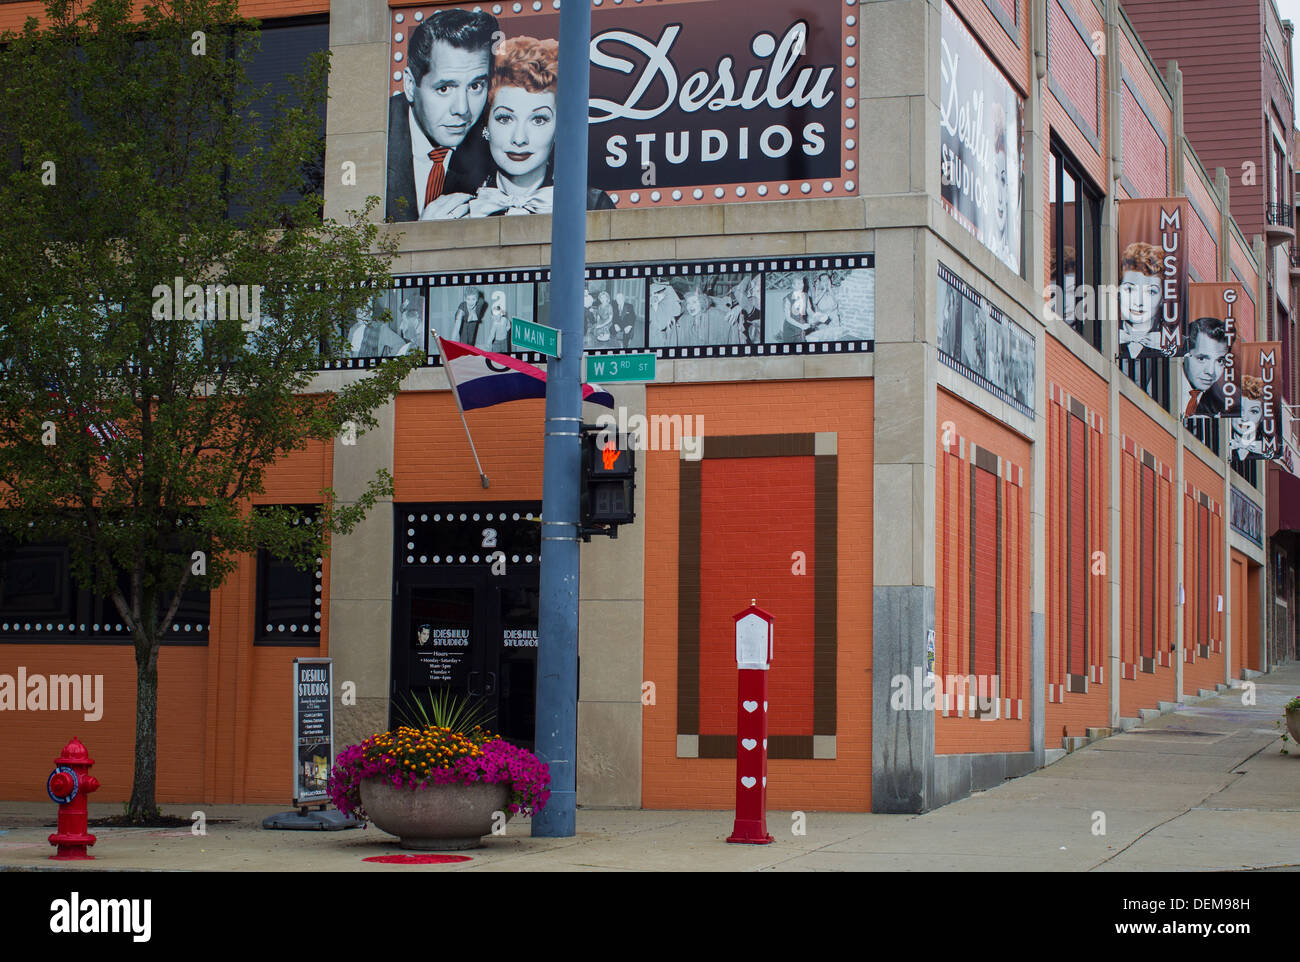 Jamestown, New York the home town of American comedian, model, film and television actress Lucille Ball. Stock Photo